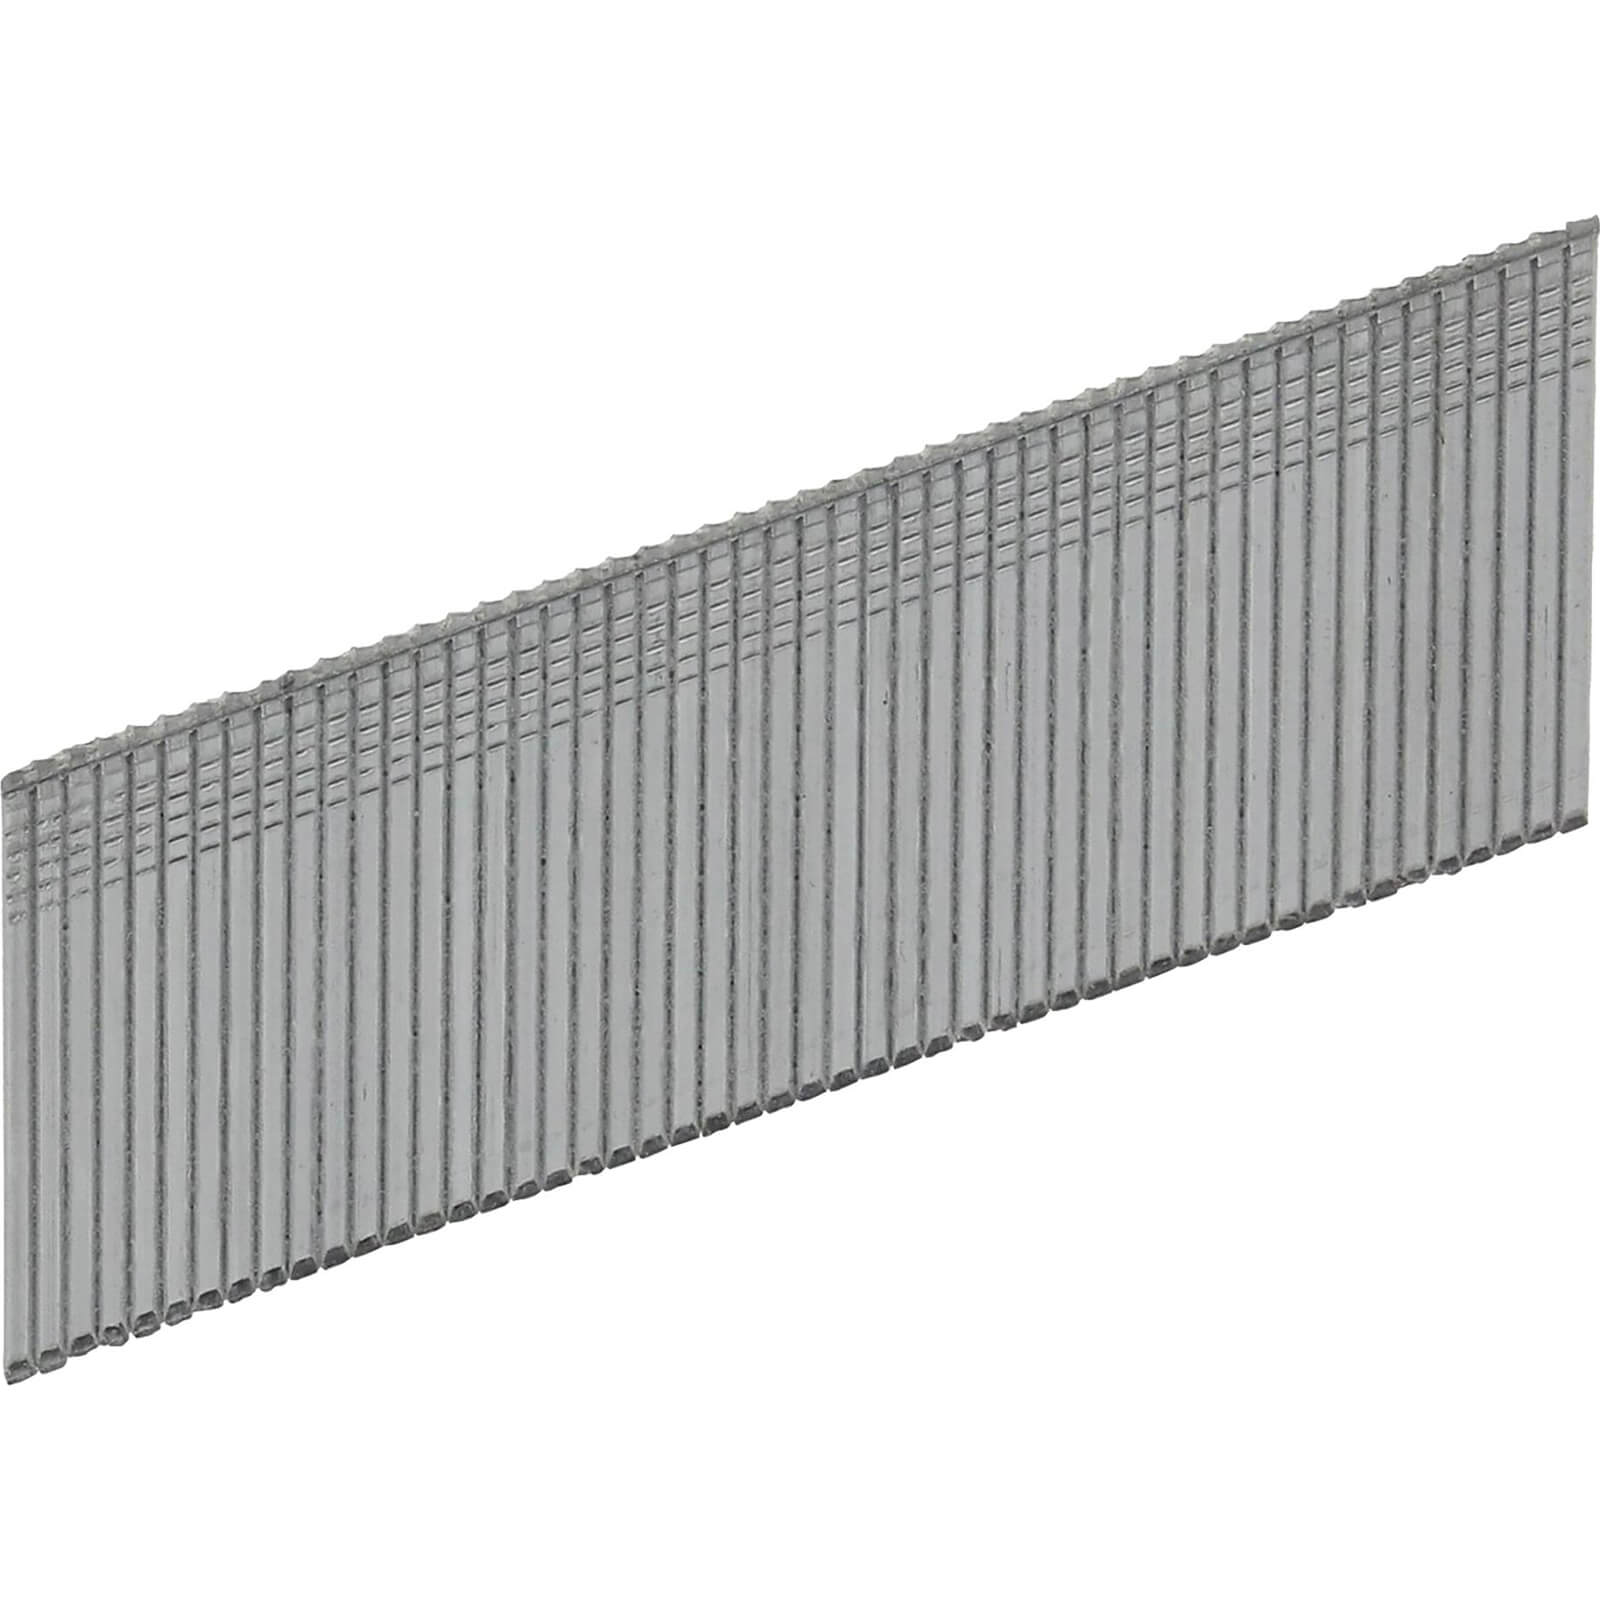 Paslode F18 x 25mm Electro Galvanised Brad Nails Pack of 2000 for IM50 & IM200 Nail Guns